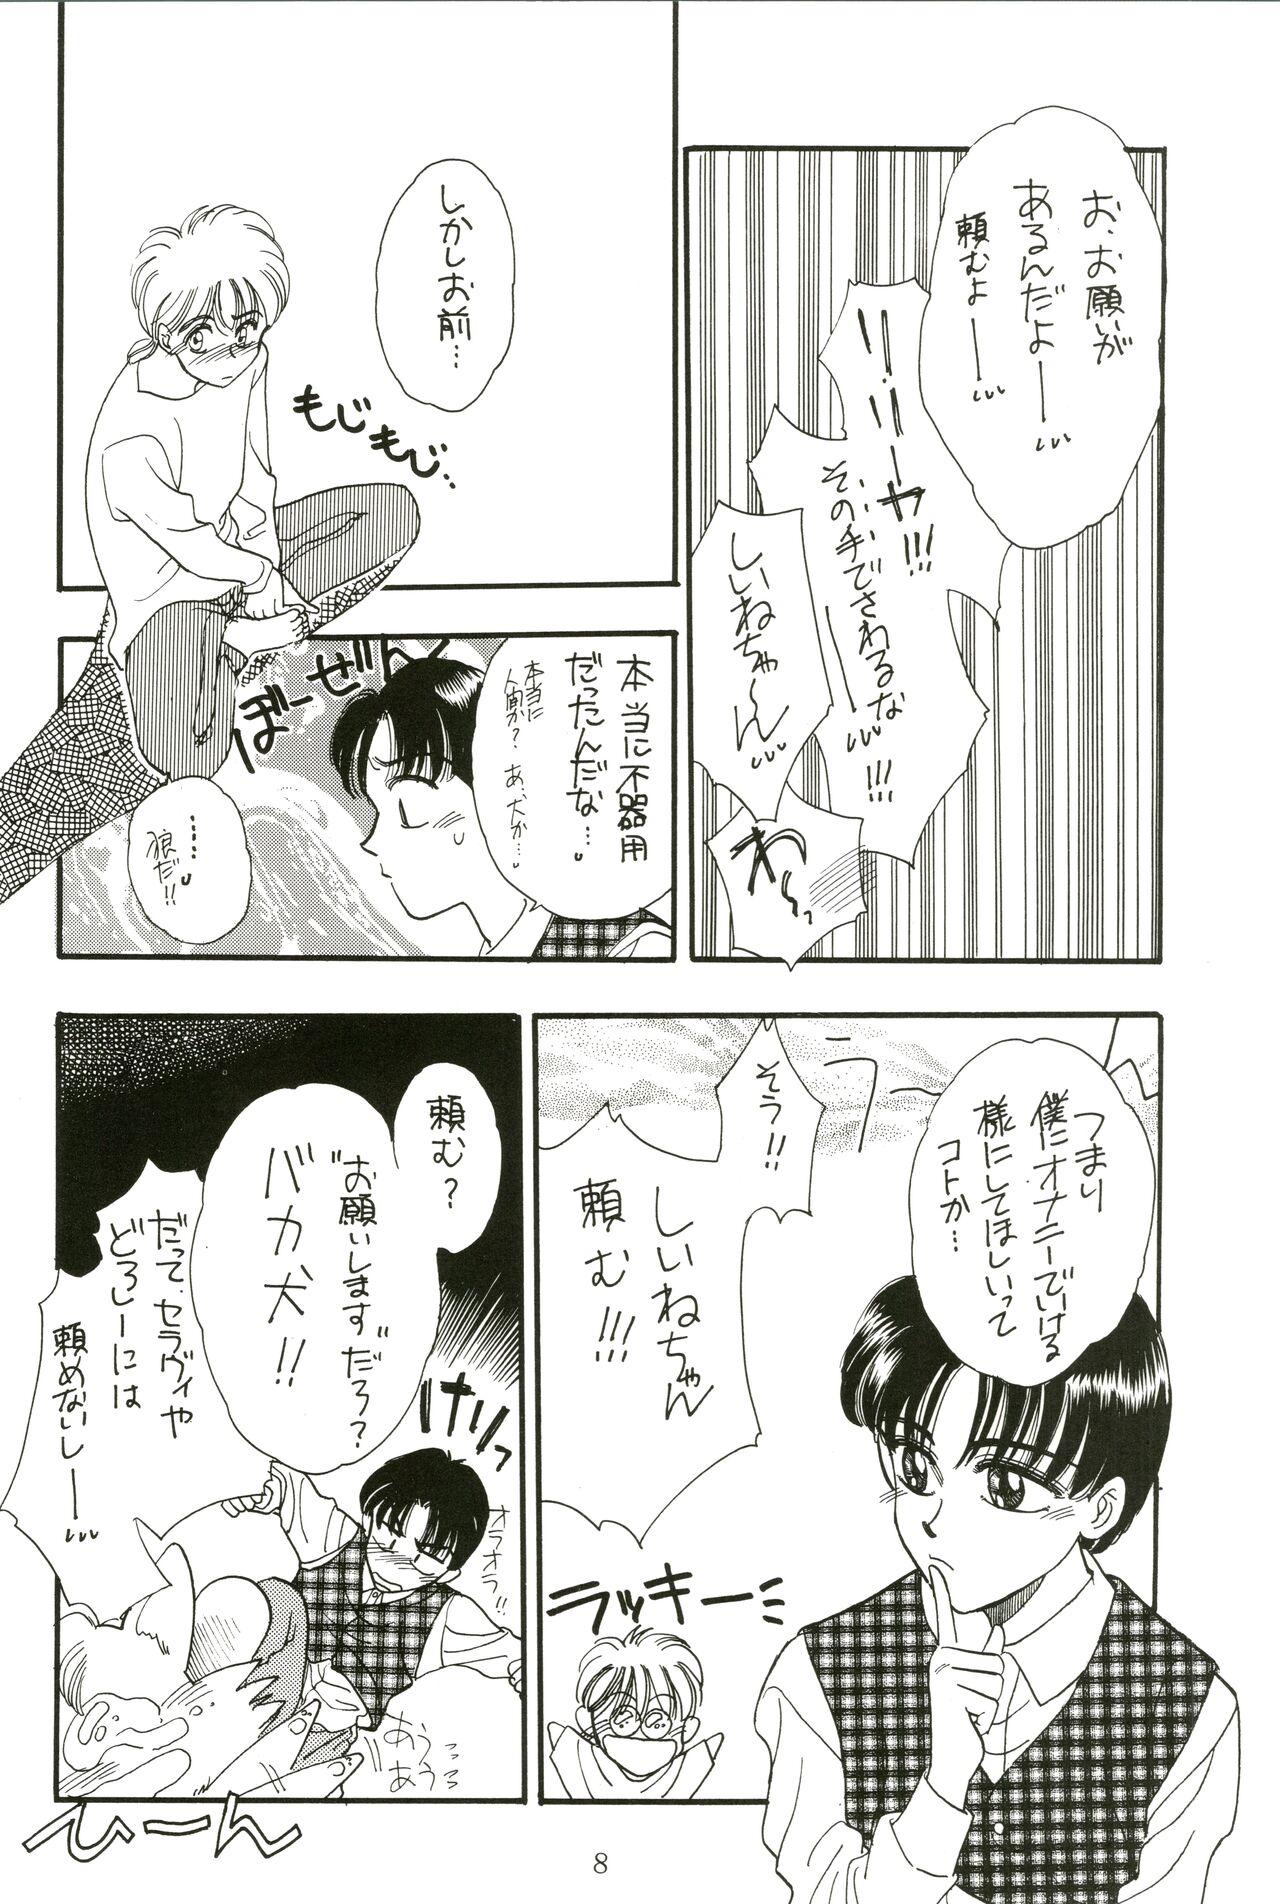 Beurette PROMINENT 4 - Akazukin chacha | red riding hood chacha Game - Page 10